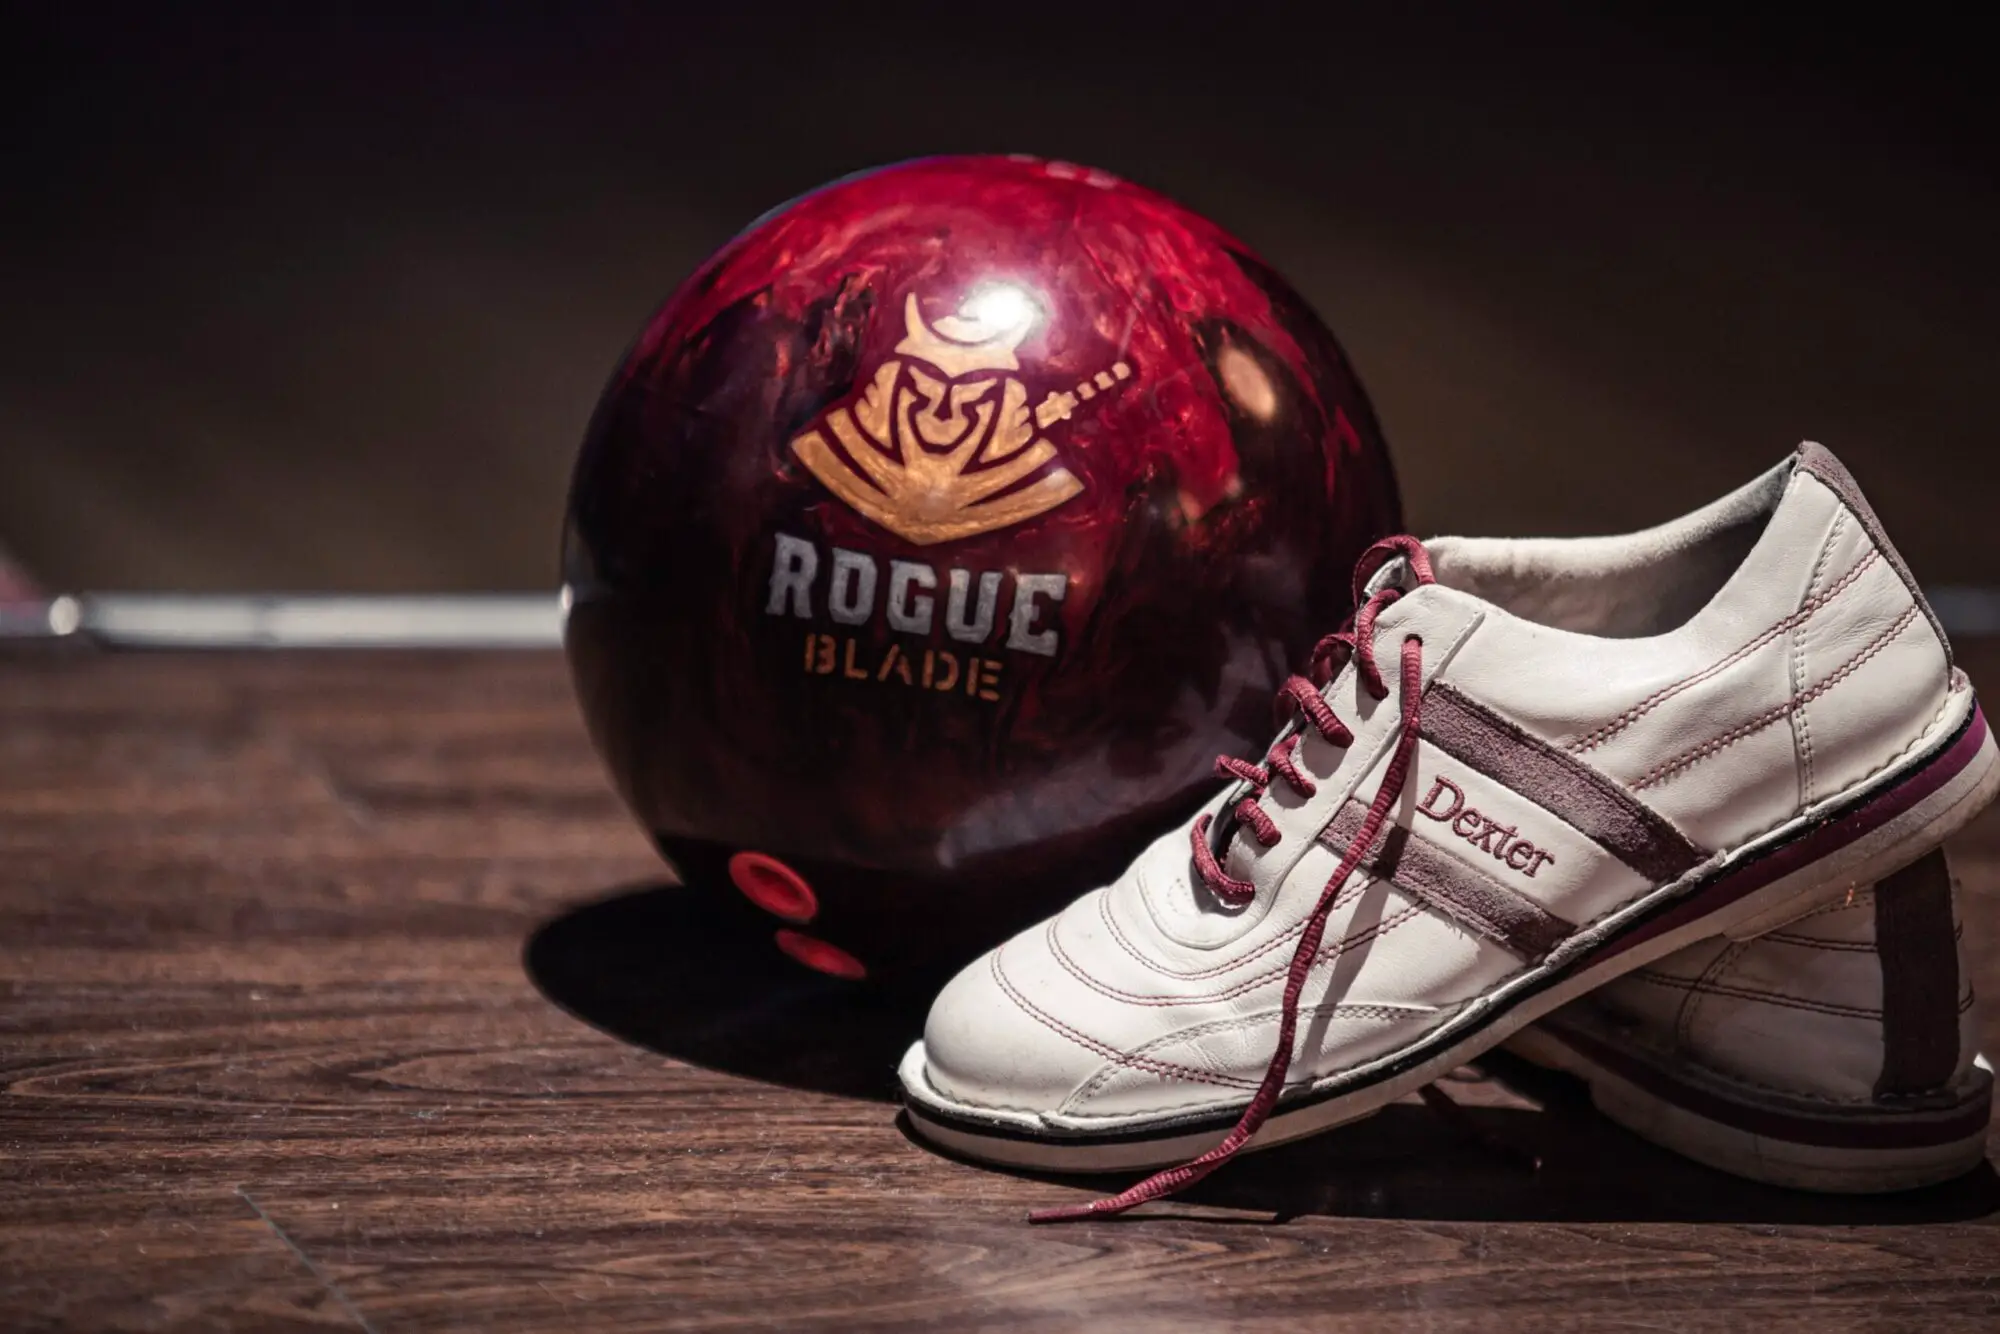 Why Are Bowling Shoes Required